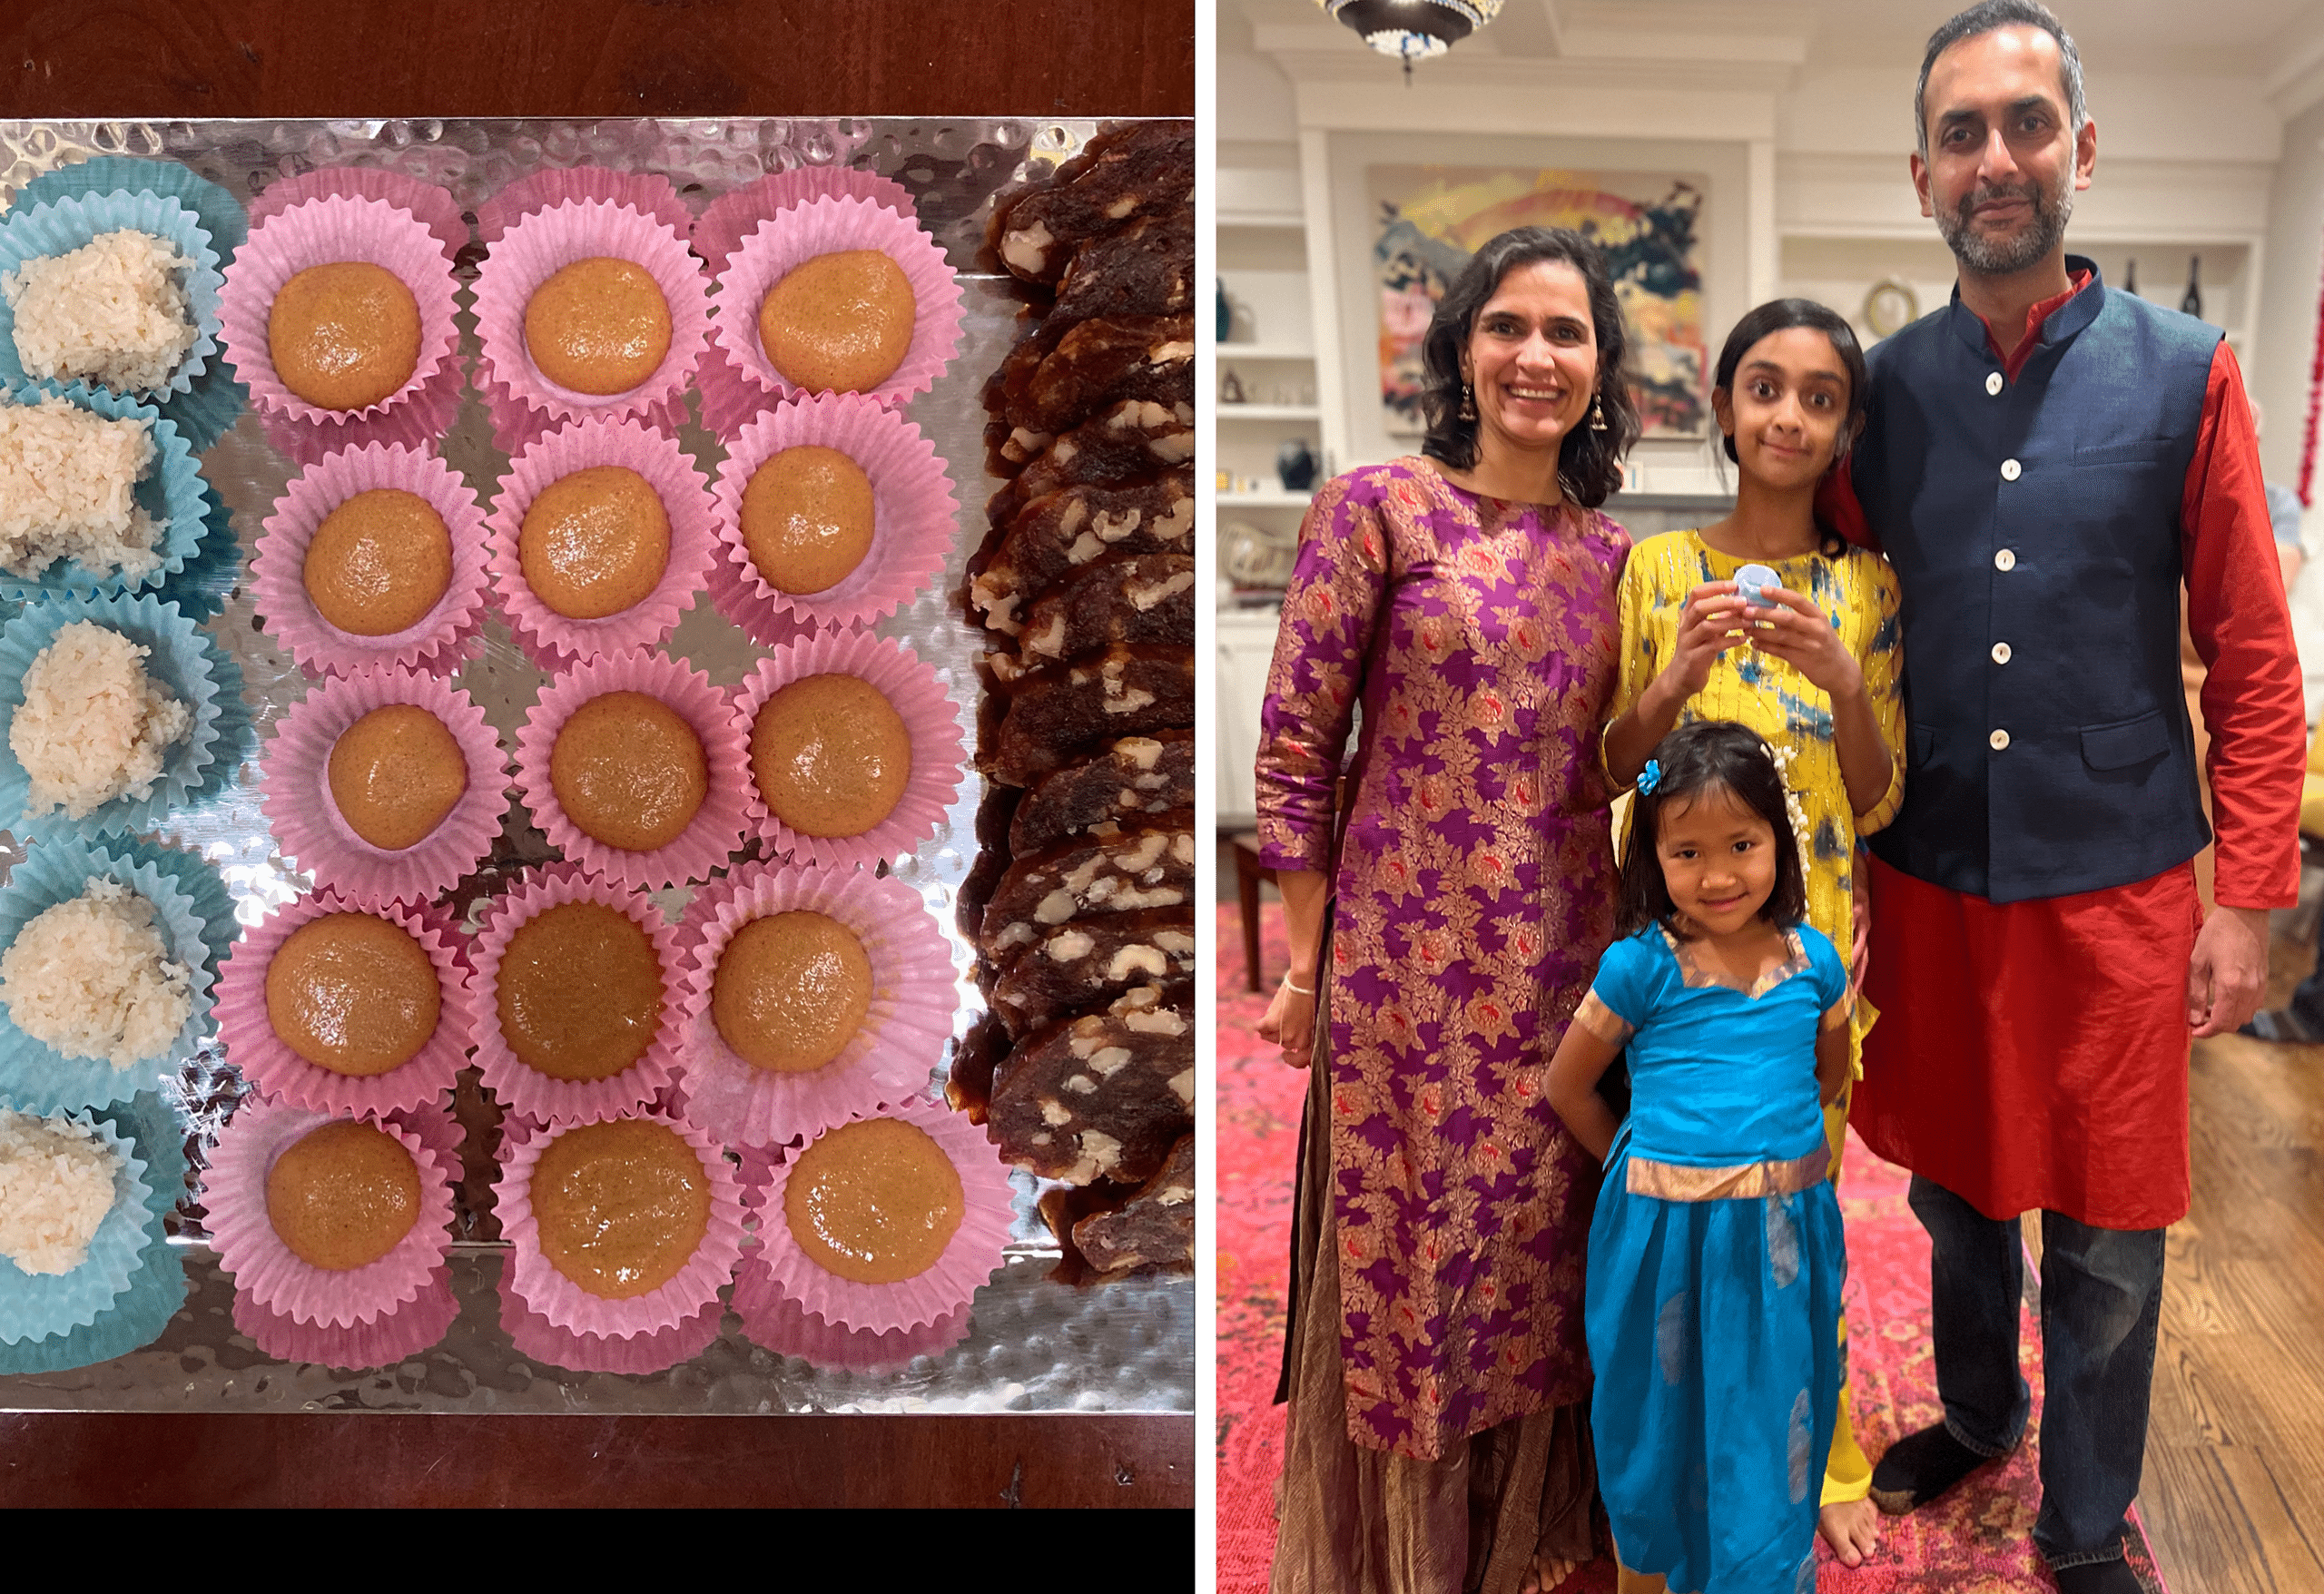 Homemade mithai for distributing to friends as a Diwali gift. Leela and sister Indra with their mom and dad, all dressed up for Diwali.